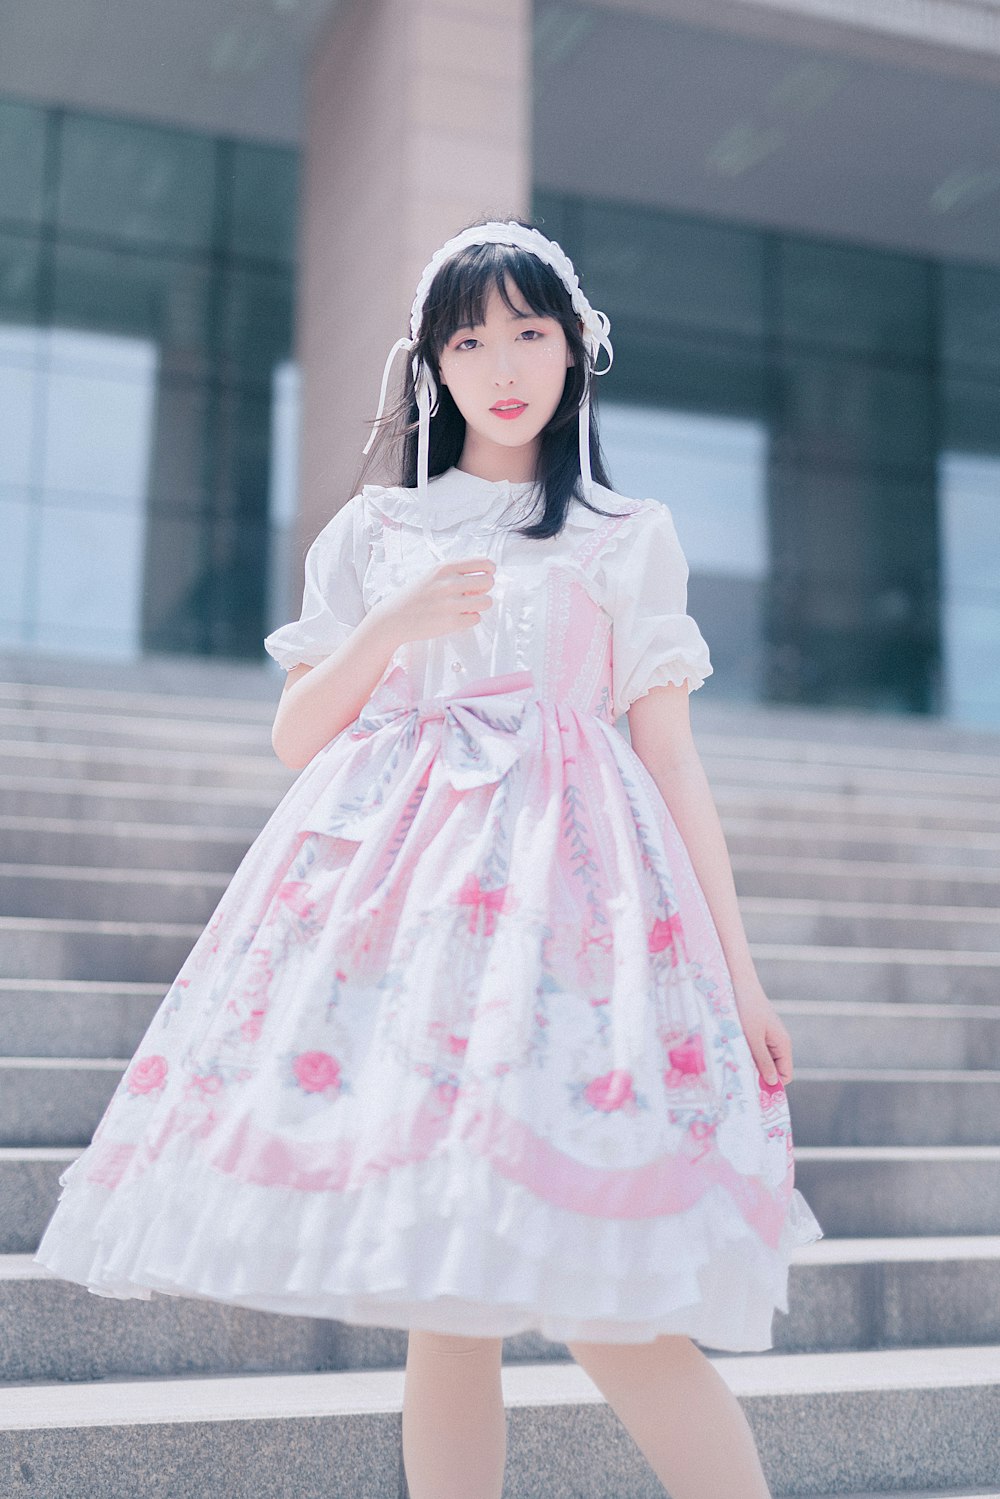 woman wearing white and pink floral dress